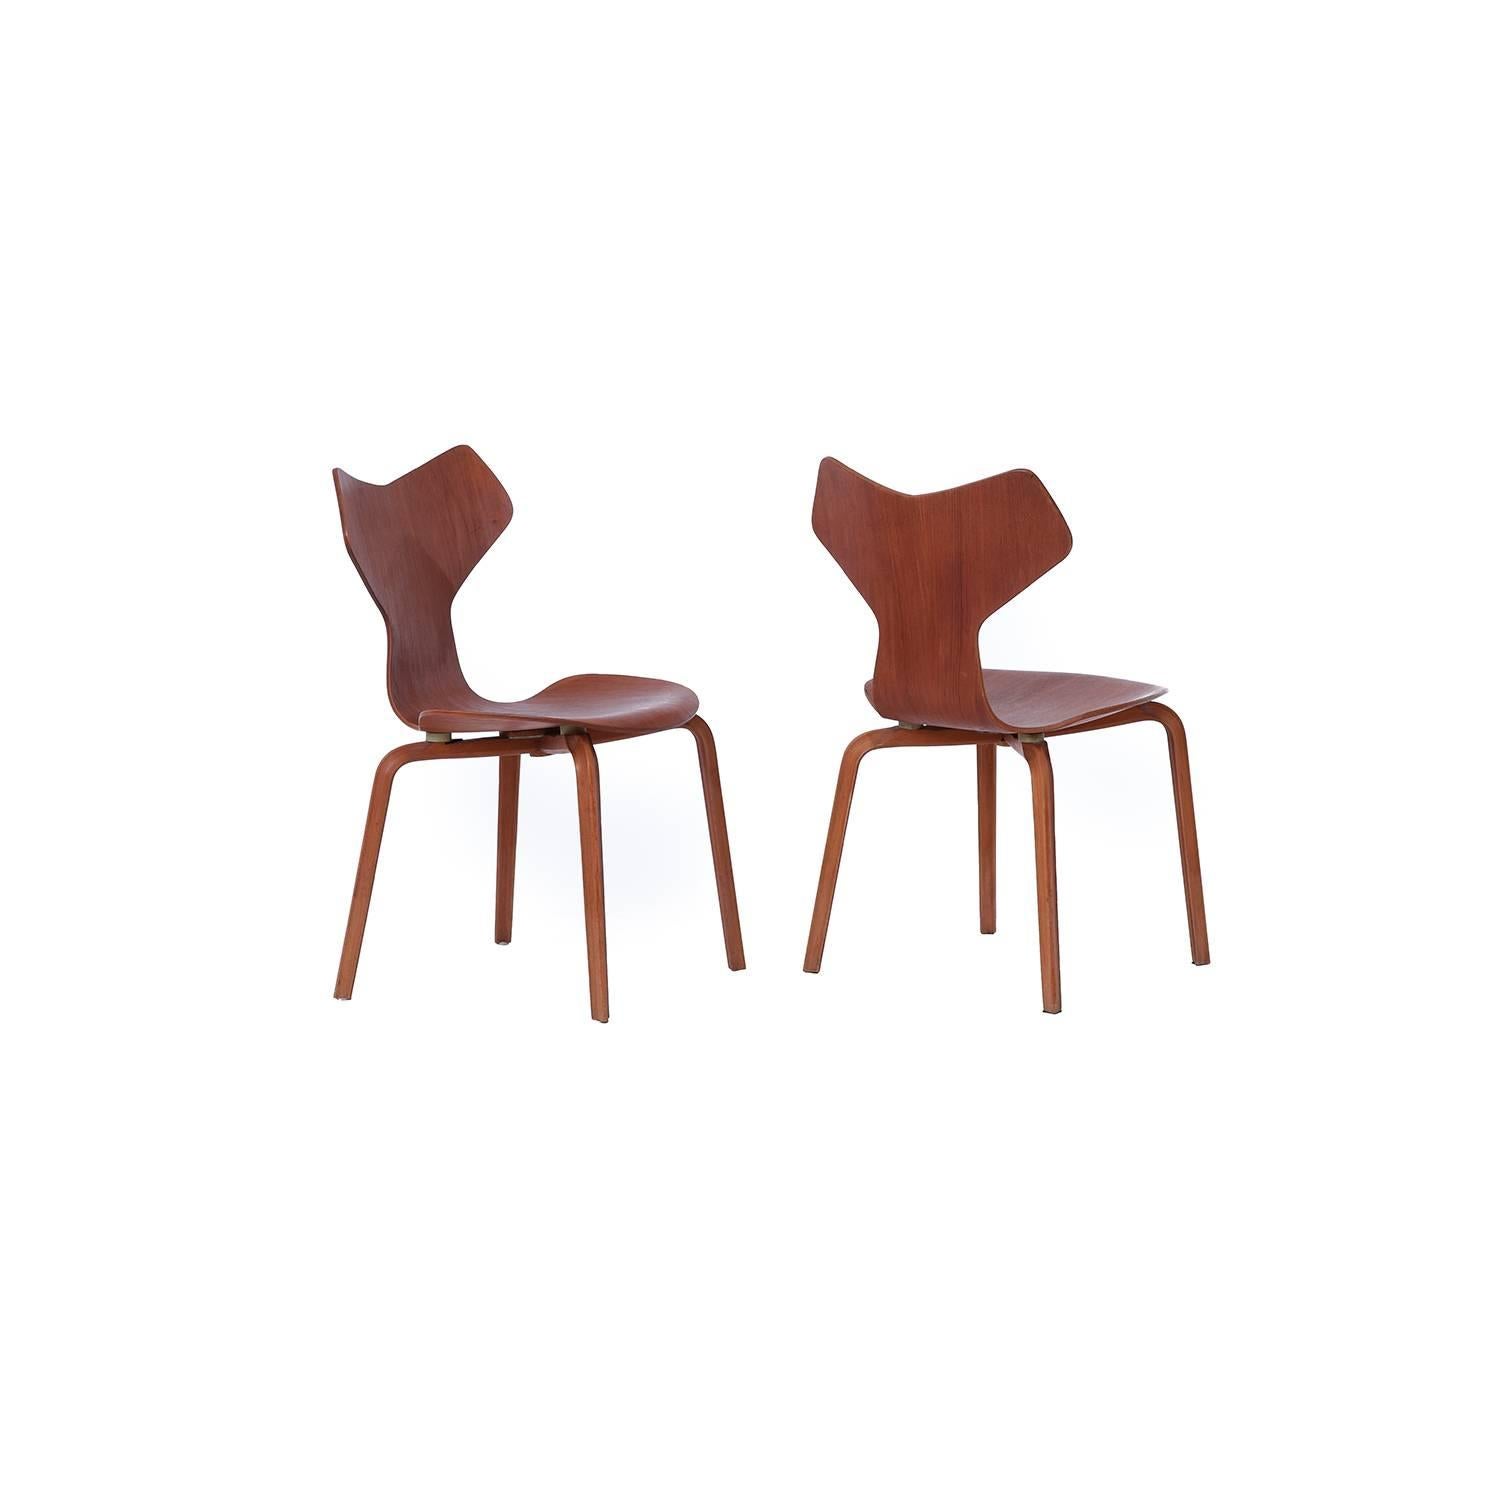 The vintage and beautifully patinated real thing, in teak, designed by Arne Jacobsen produced by Fritz Hansen. These are priced as a set of two, however we are able to sell them by the piece as well.